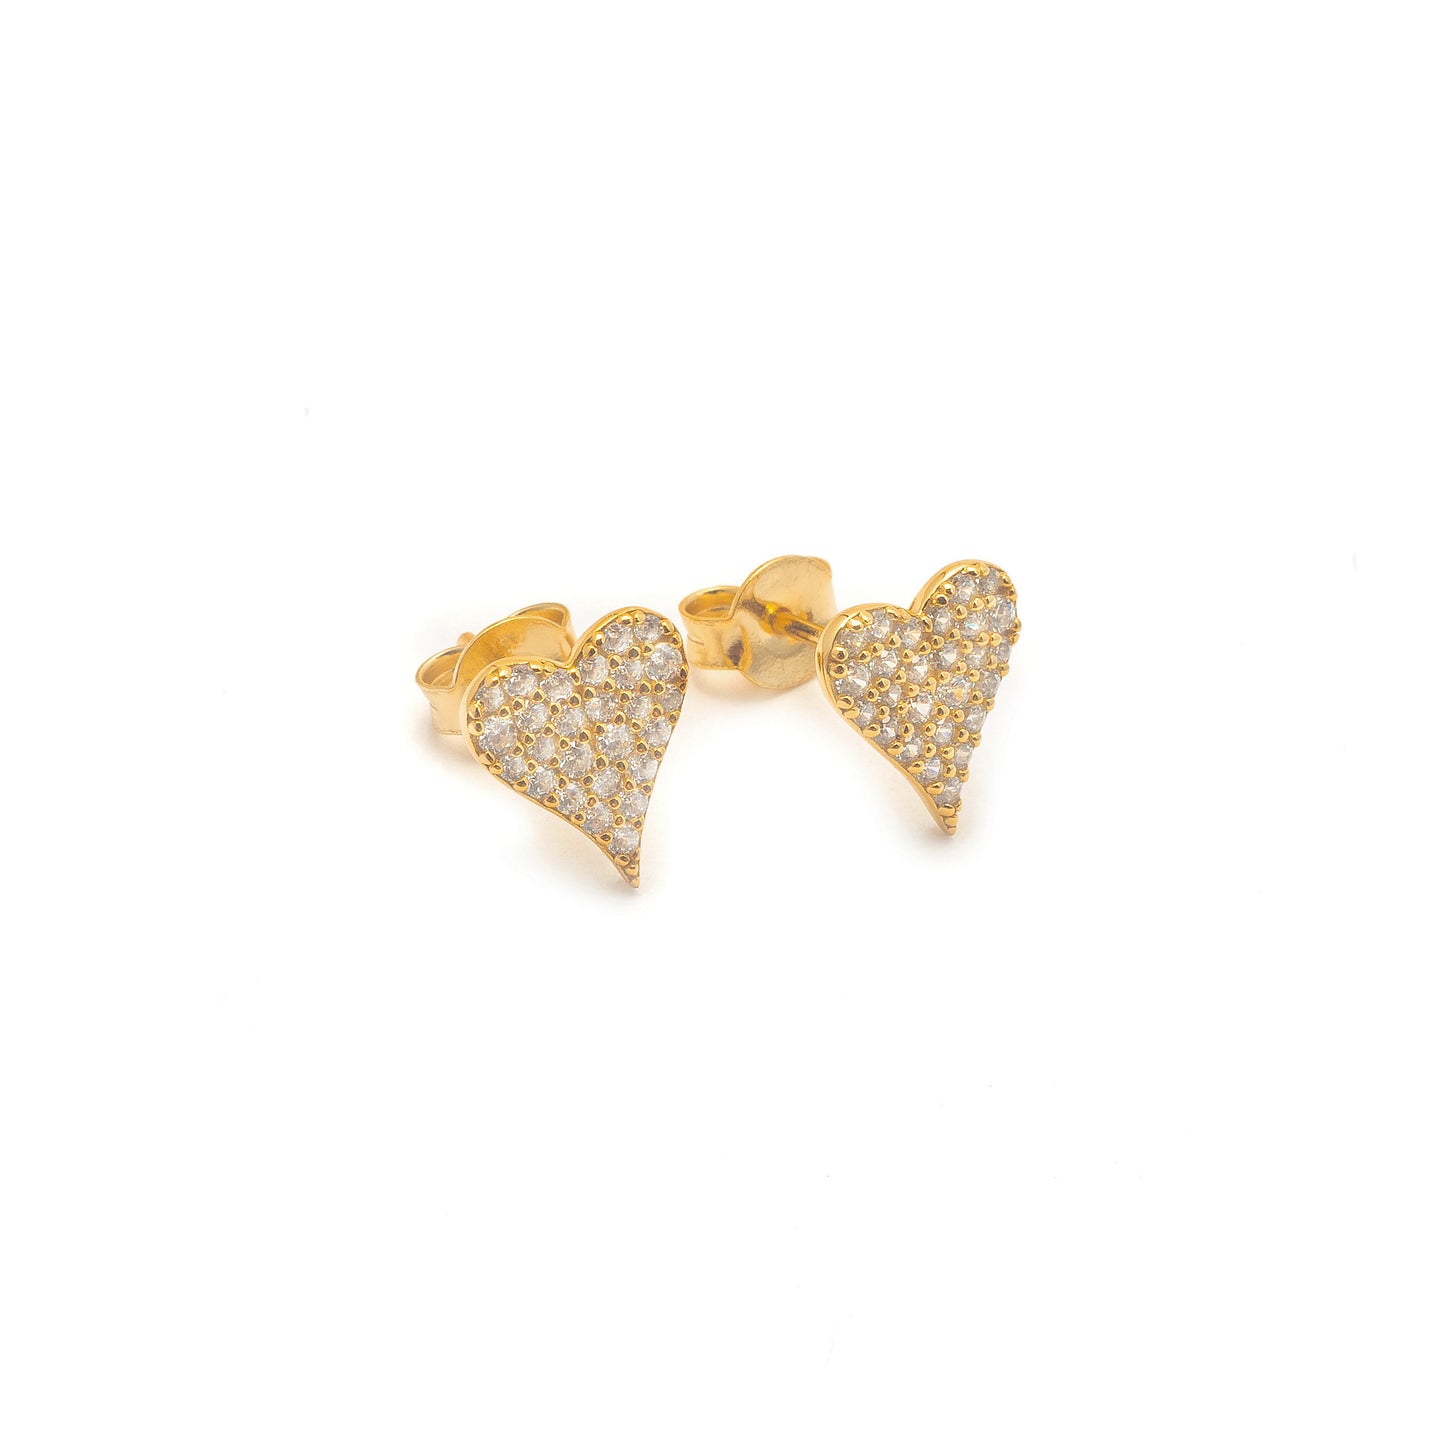 ICY HEART STUDS